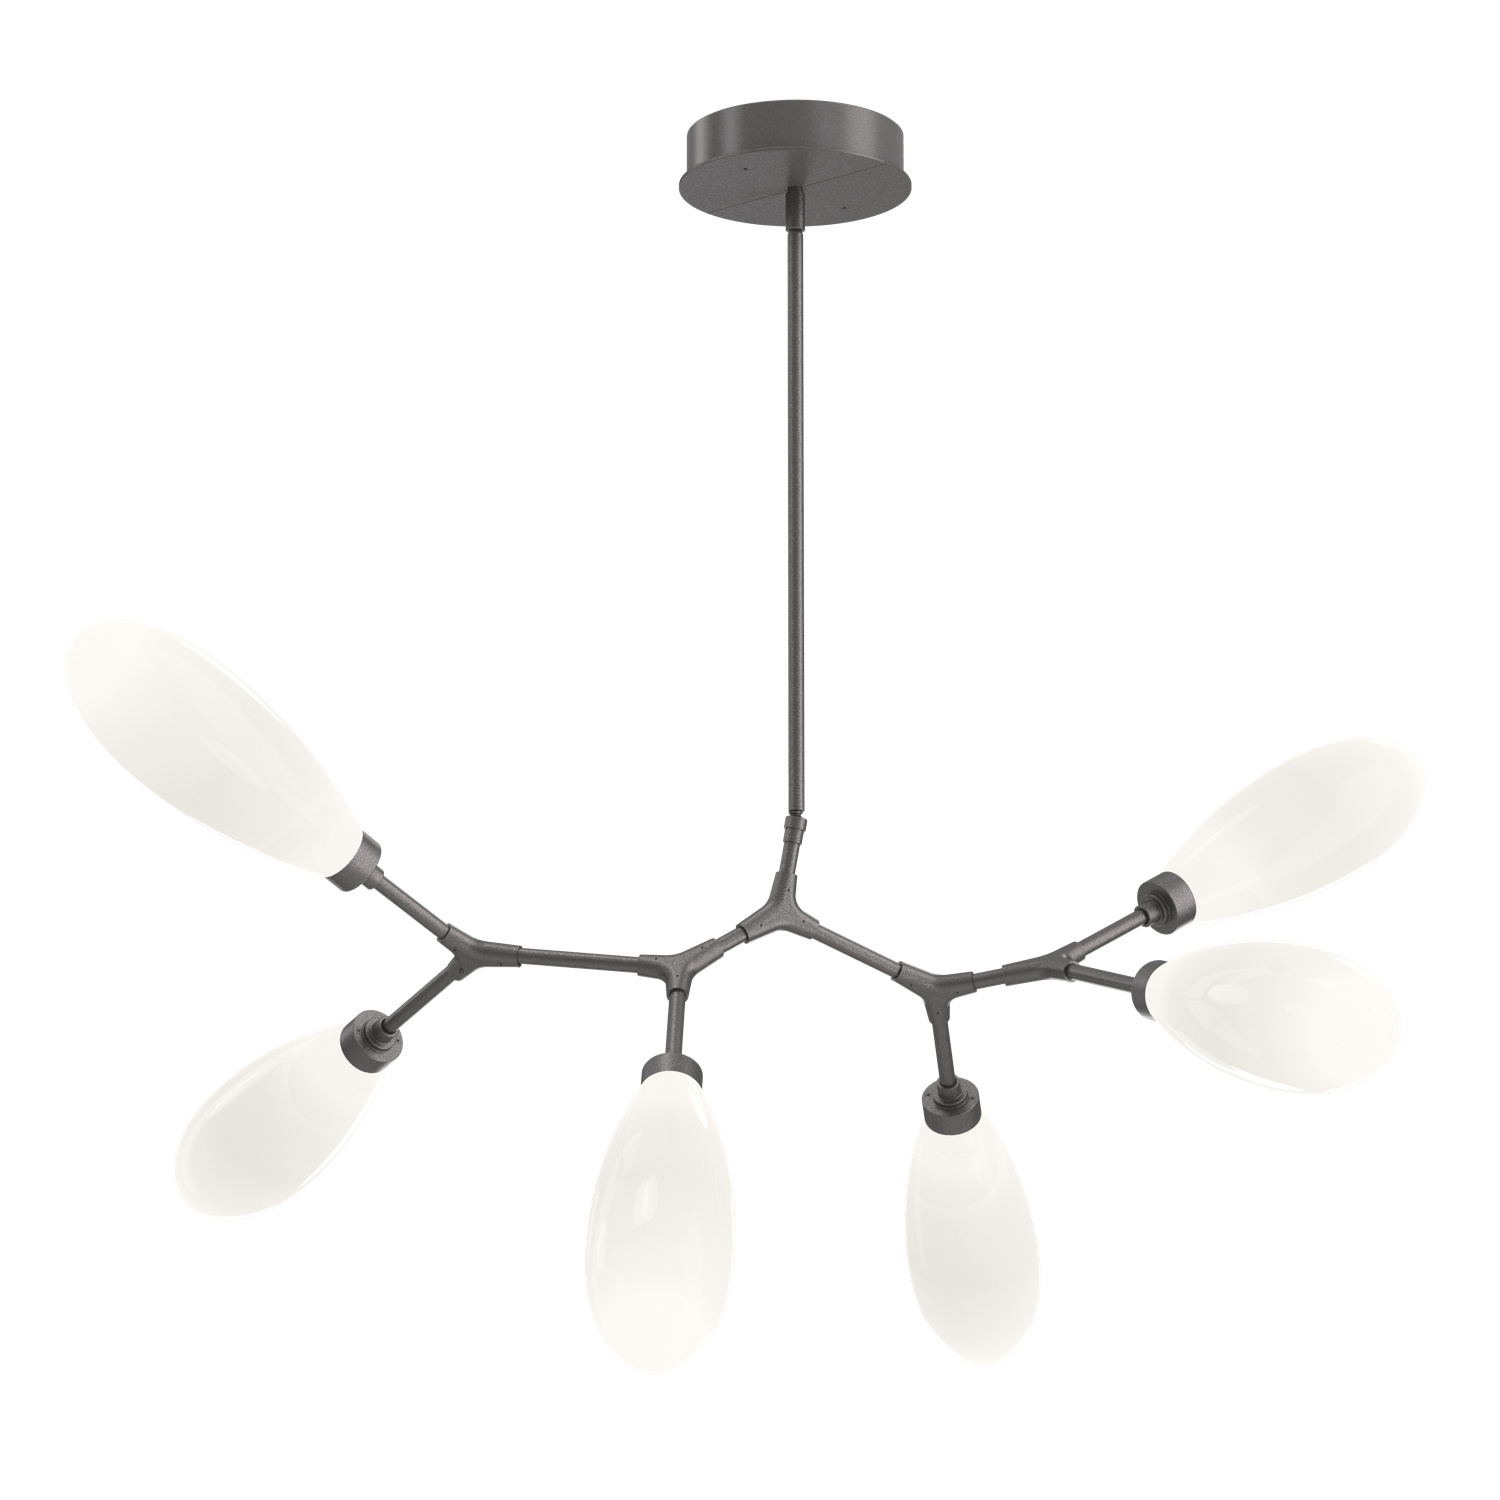 PLB0071-BA-GP-WL-LL-Hammerton-Studio-Fiori-6-light-organic-branch-chandelier-with-graphite-finish-and-opal-white-glass-shades-and-LED-lamping